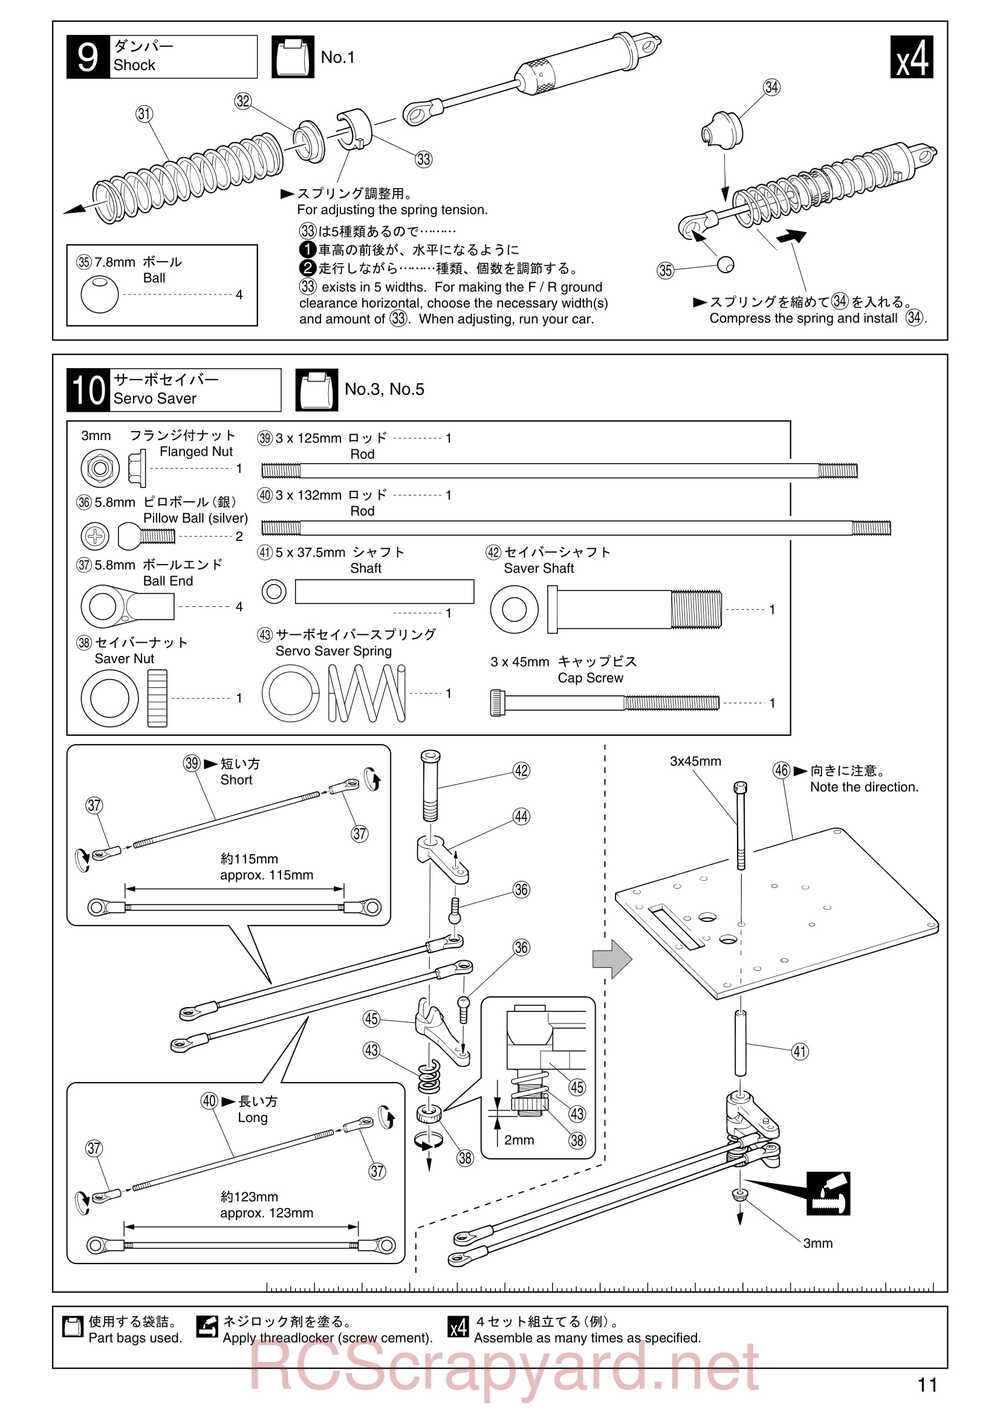 Kyosho - 30522b - Twin-Forcec-SP - Manual - Page 11